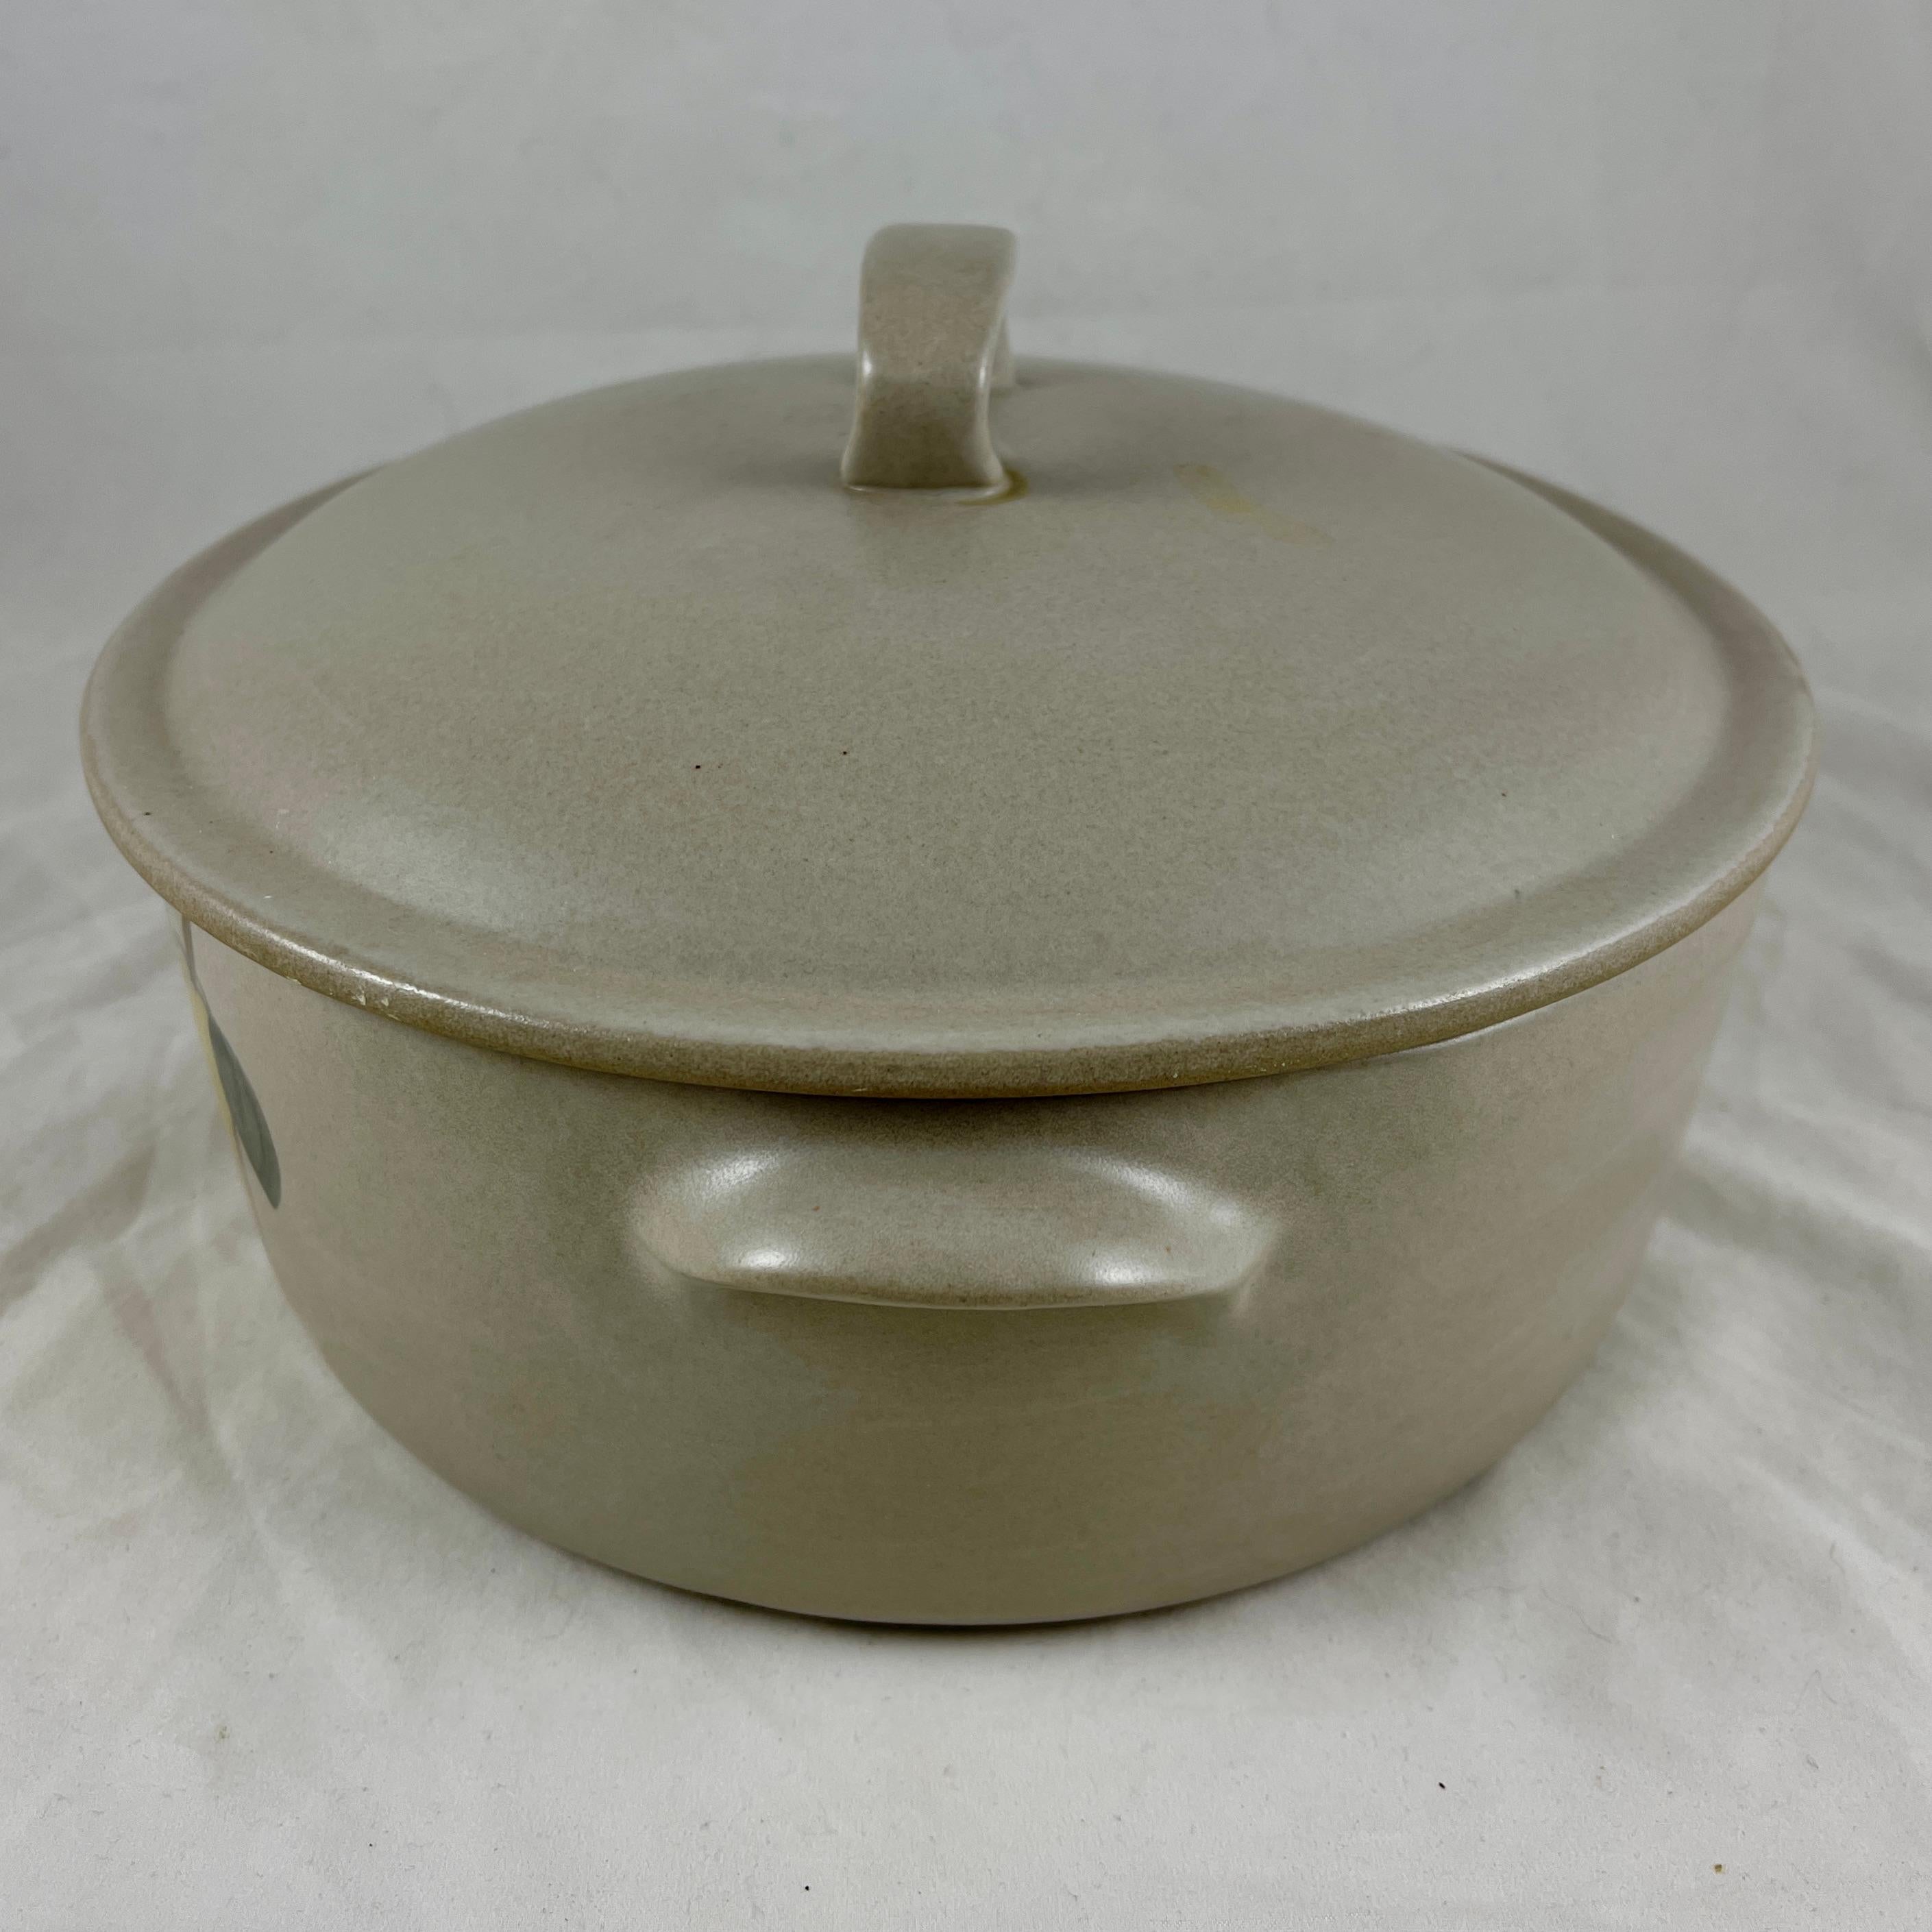 American Mid-Century Goss Chatham Pottery Country Harvest Stoneware Dutch Oven Casserole